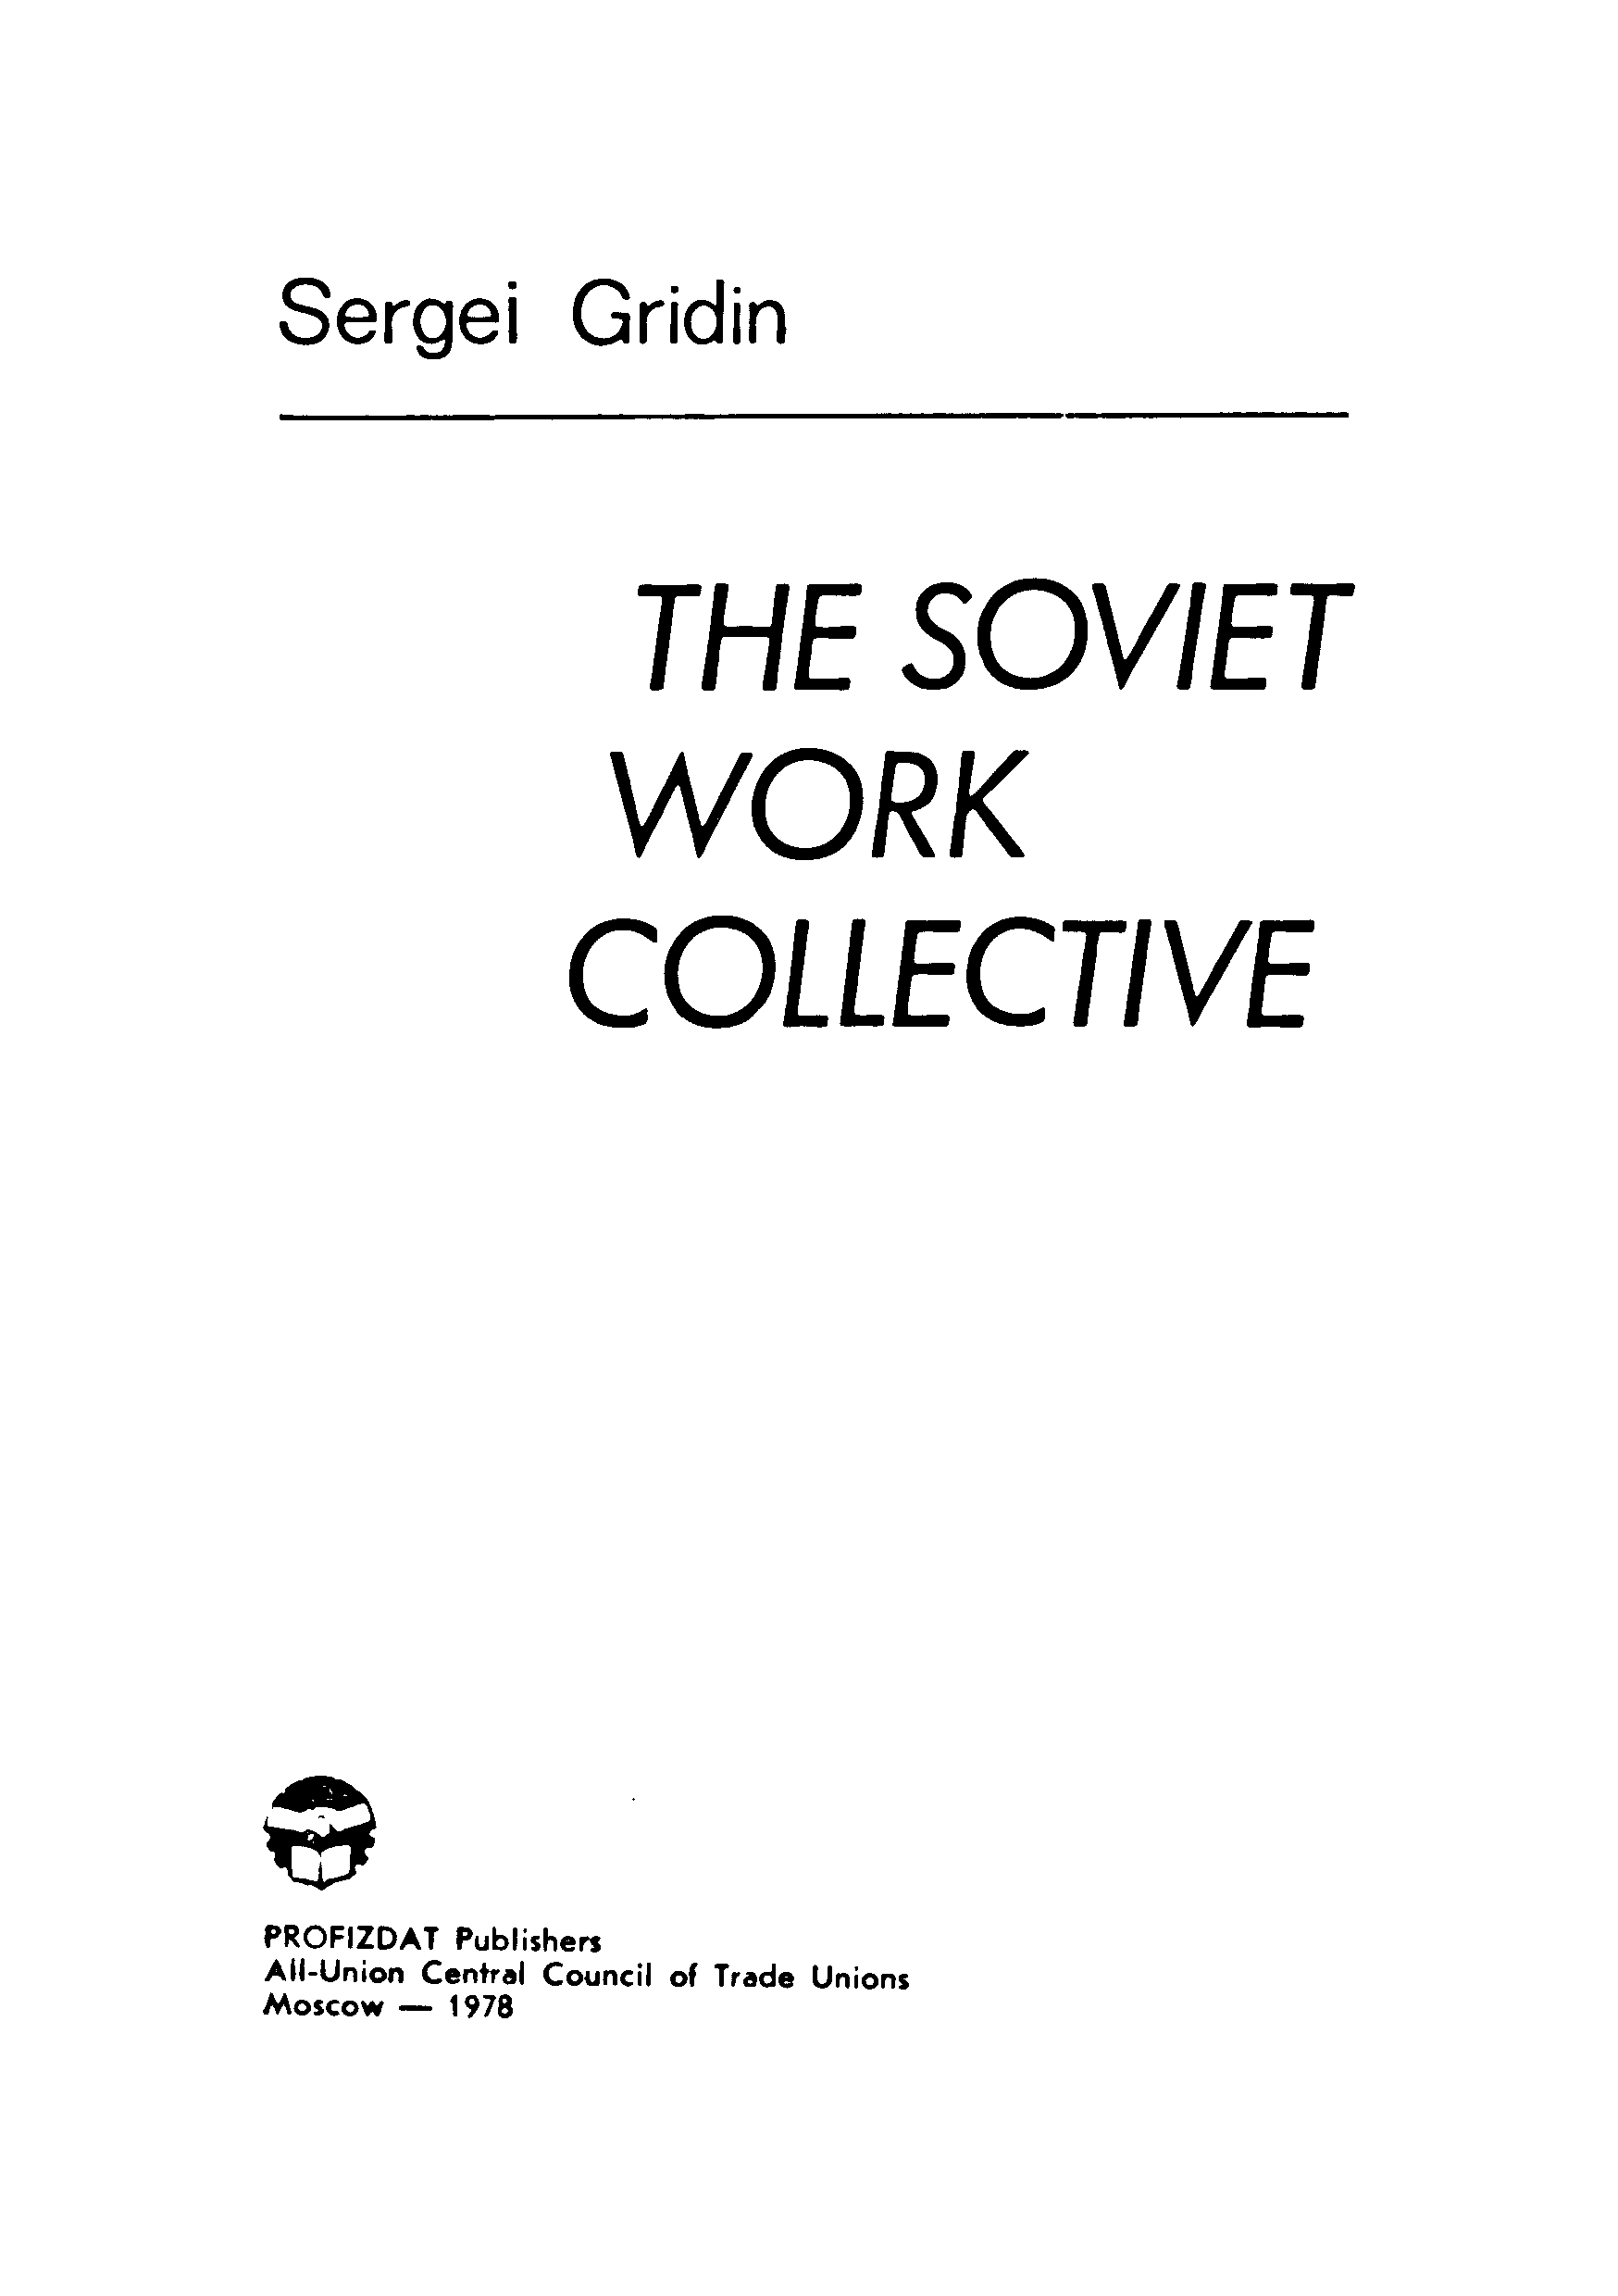 The Soviet Work Collective